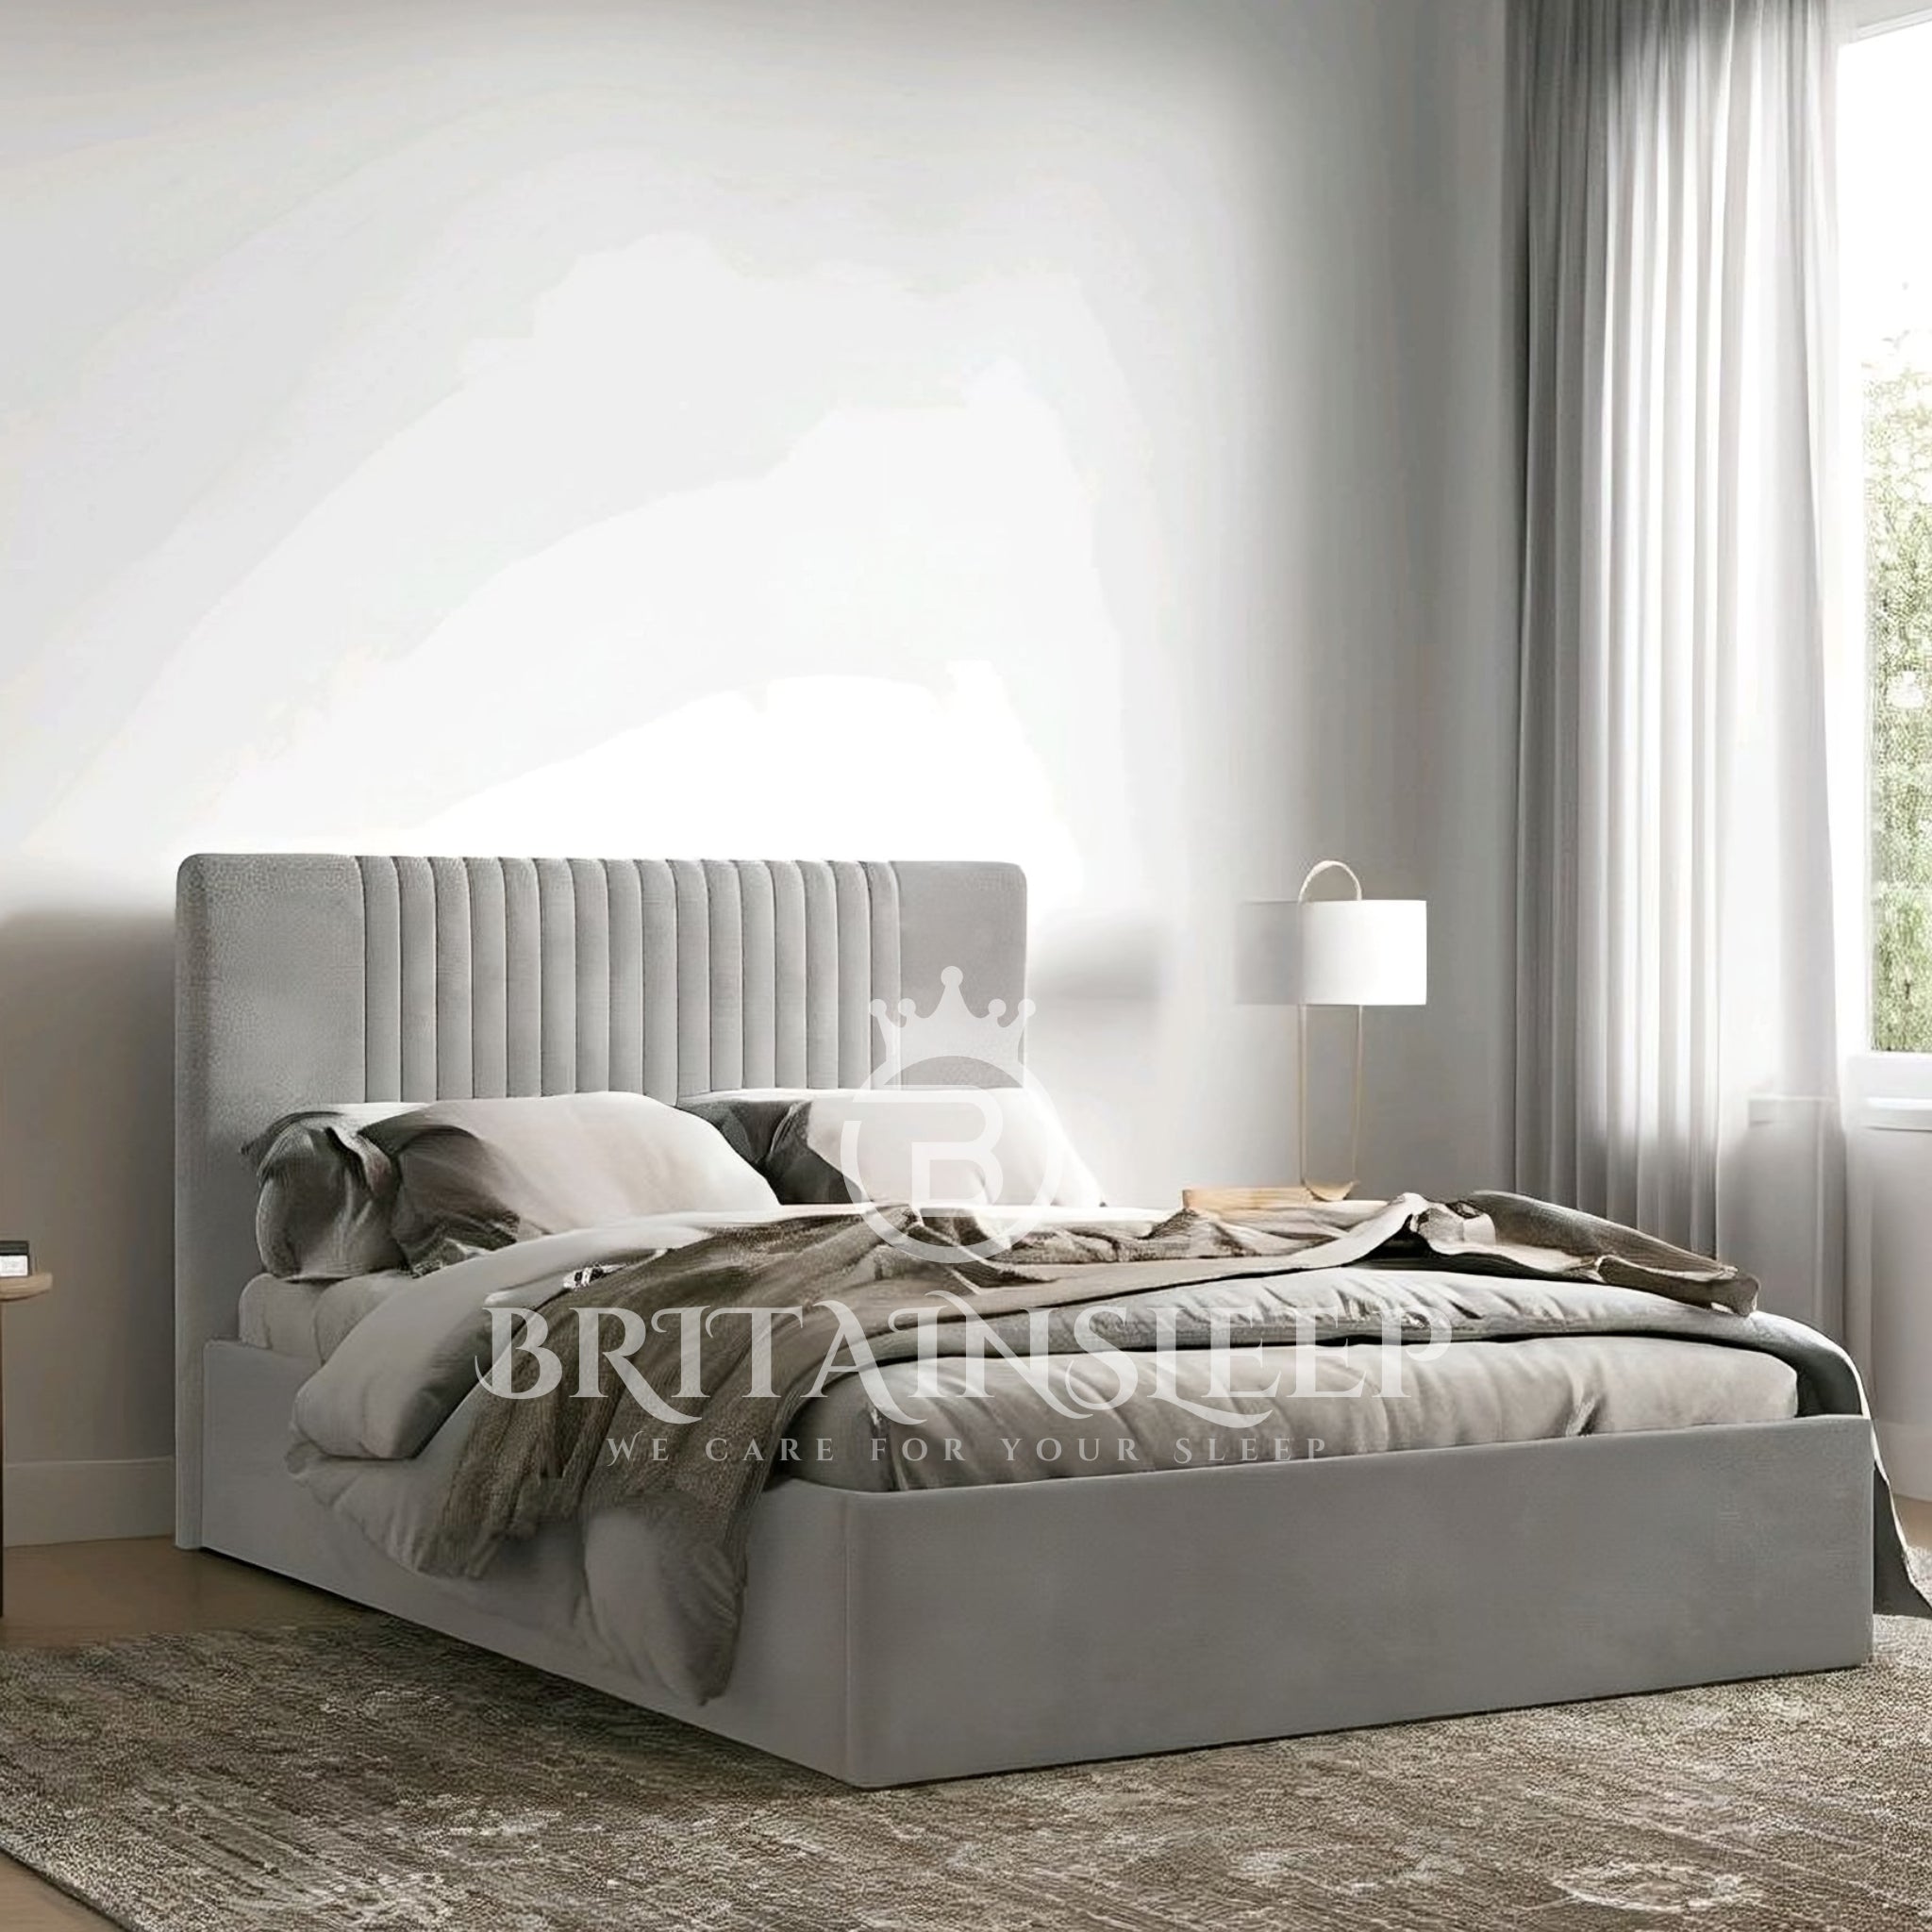 Malmo Storage 50'' Upholstered Bed Frame/| Double | Single | KingSize | Super King Size| Queen Bed Britainsleep